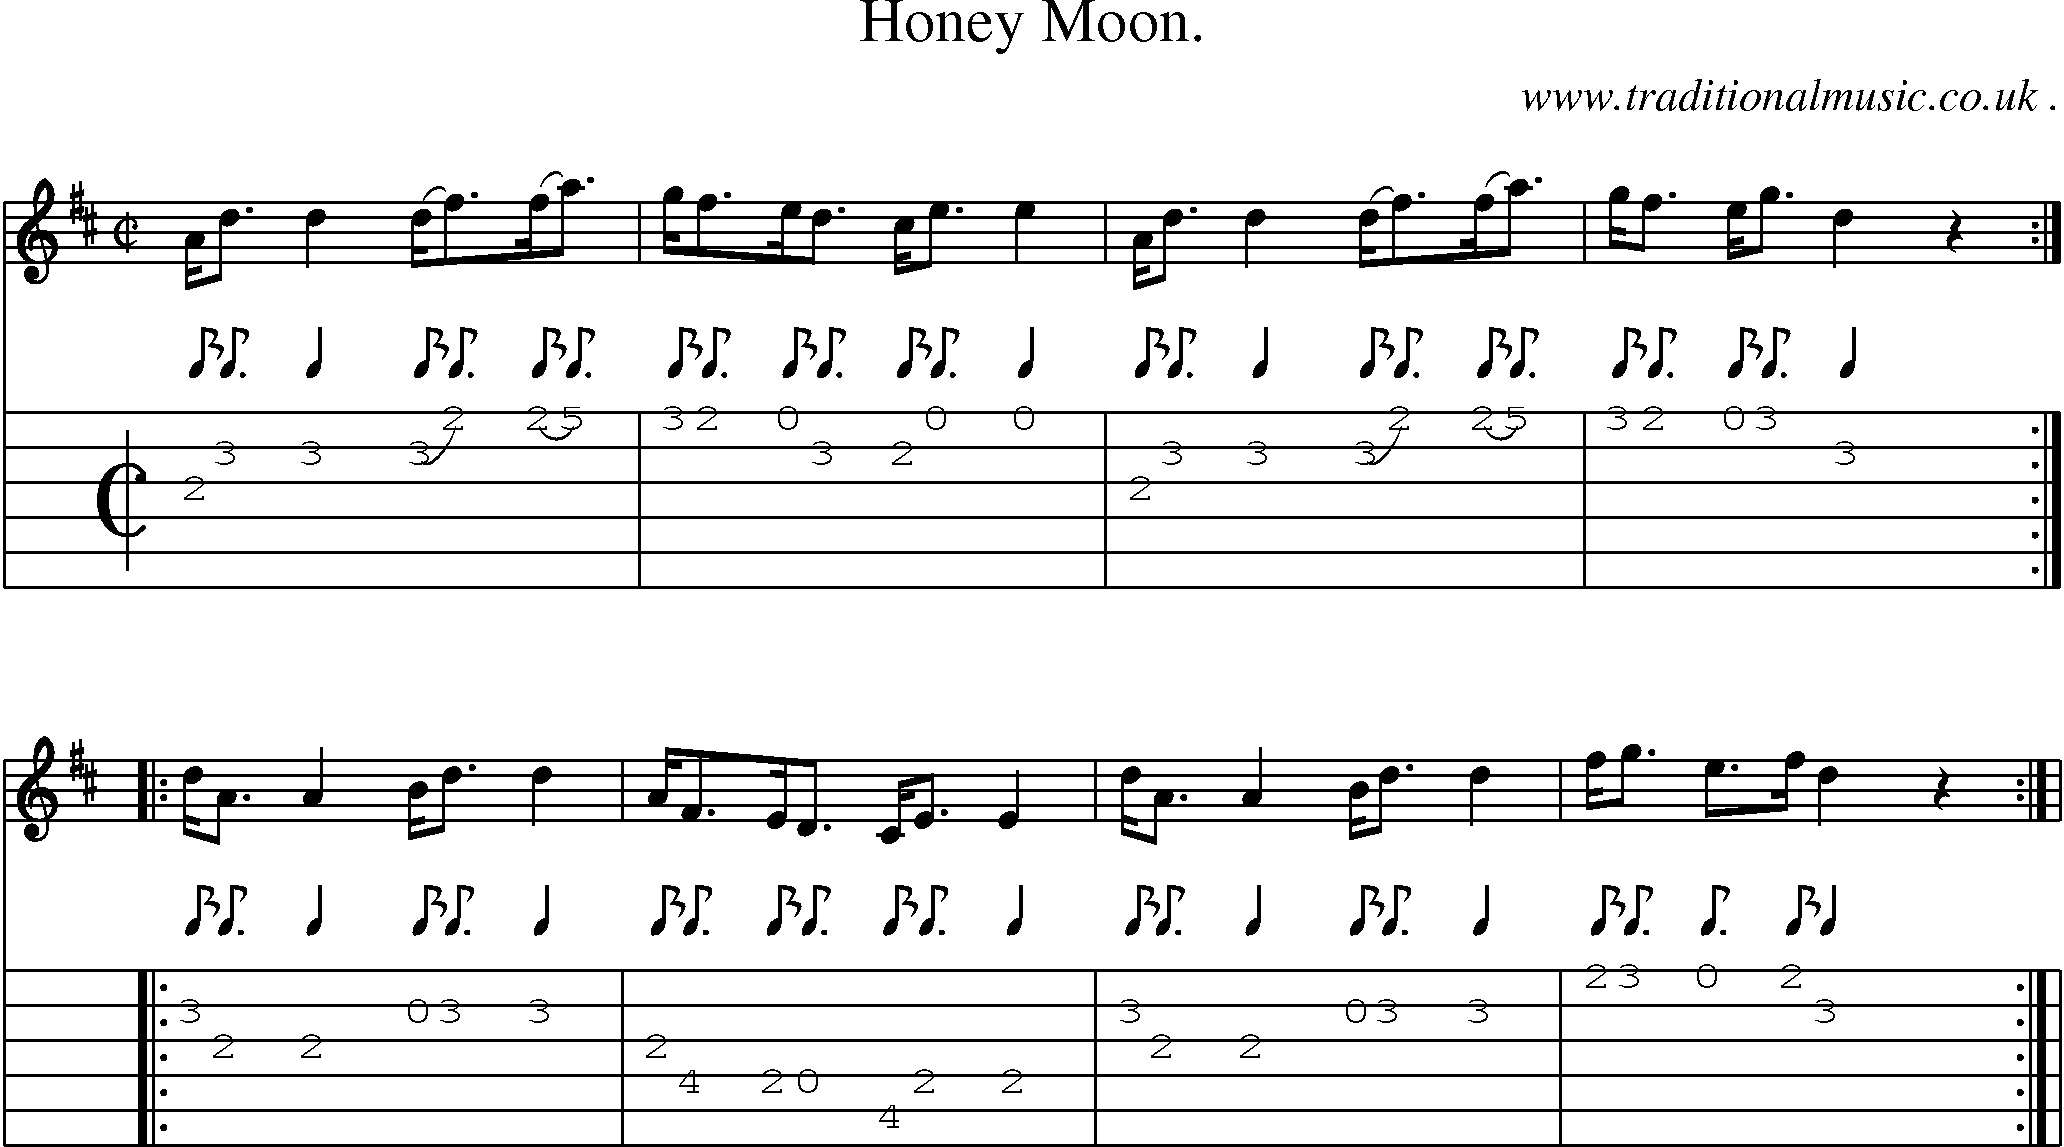 Sheet-Music and Guitar Tabs for Honey Moon